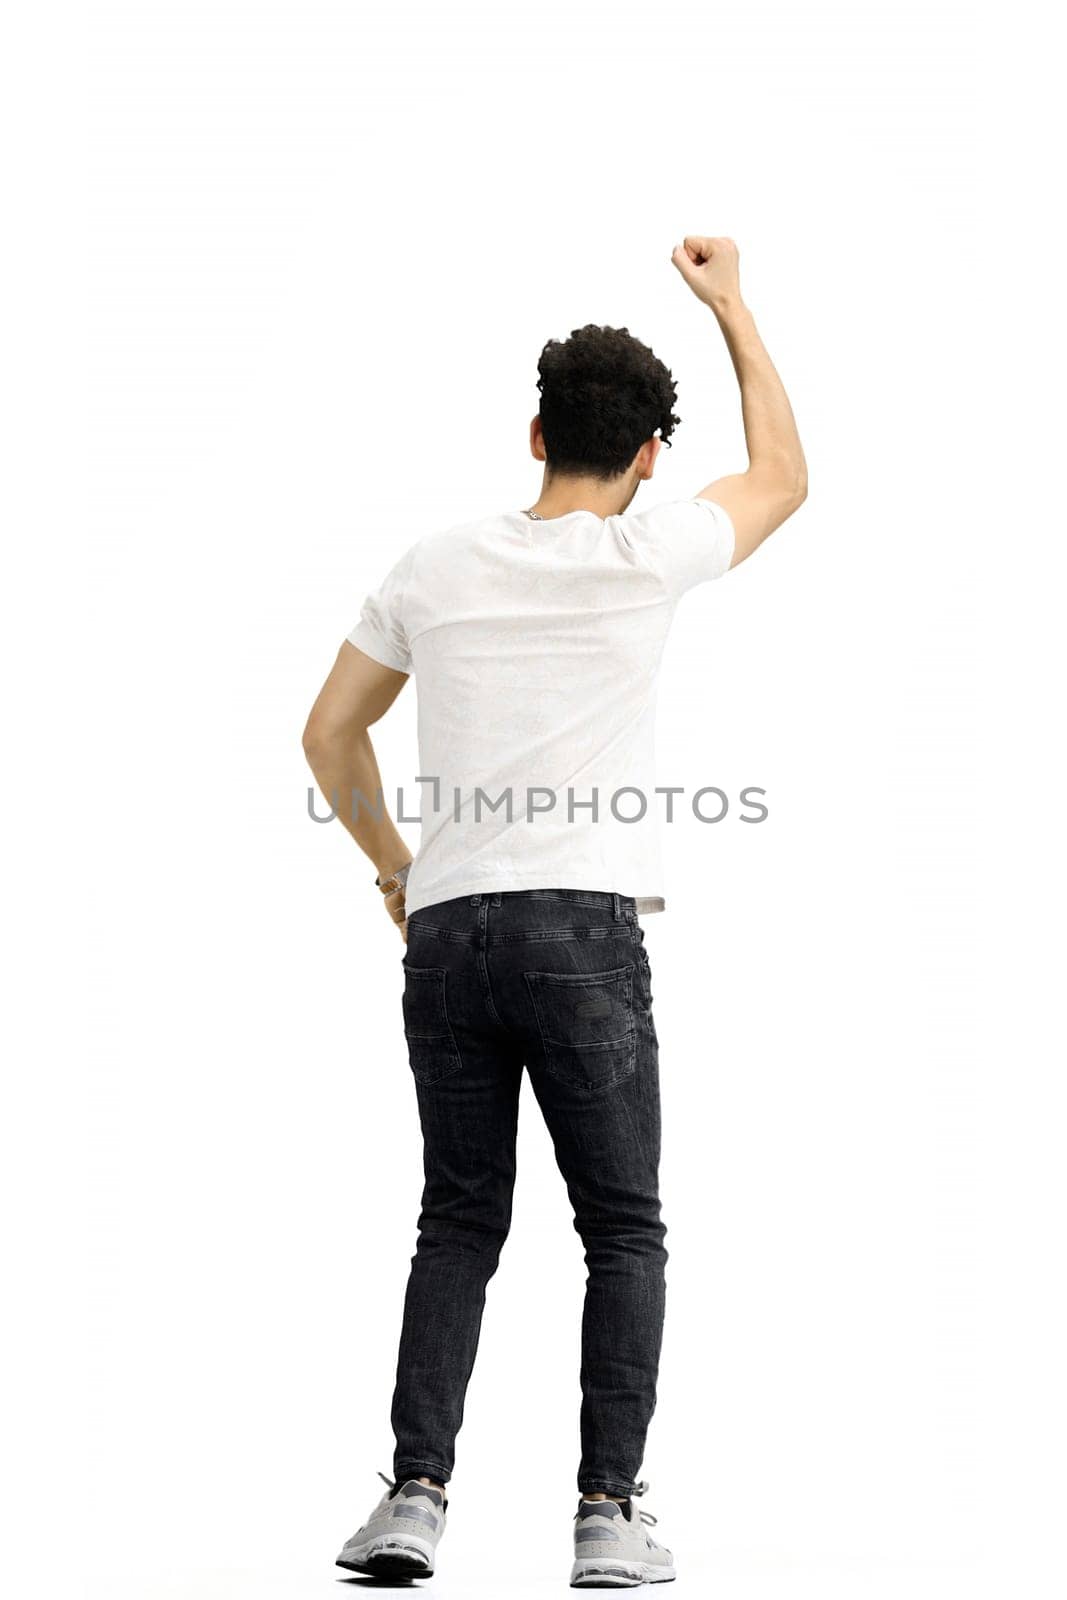 A man, on a white background, in full height, his hands raised up.